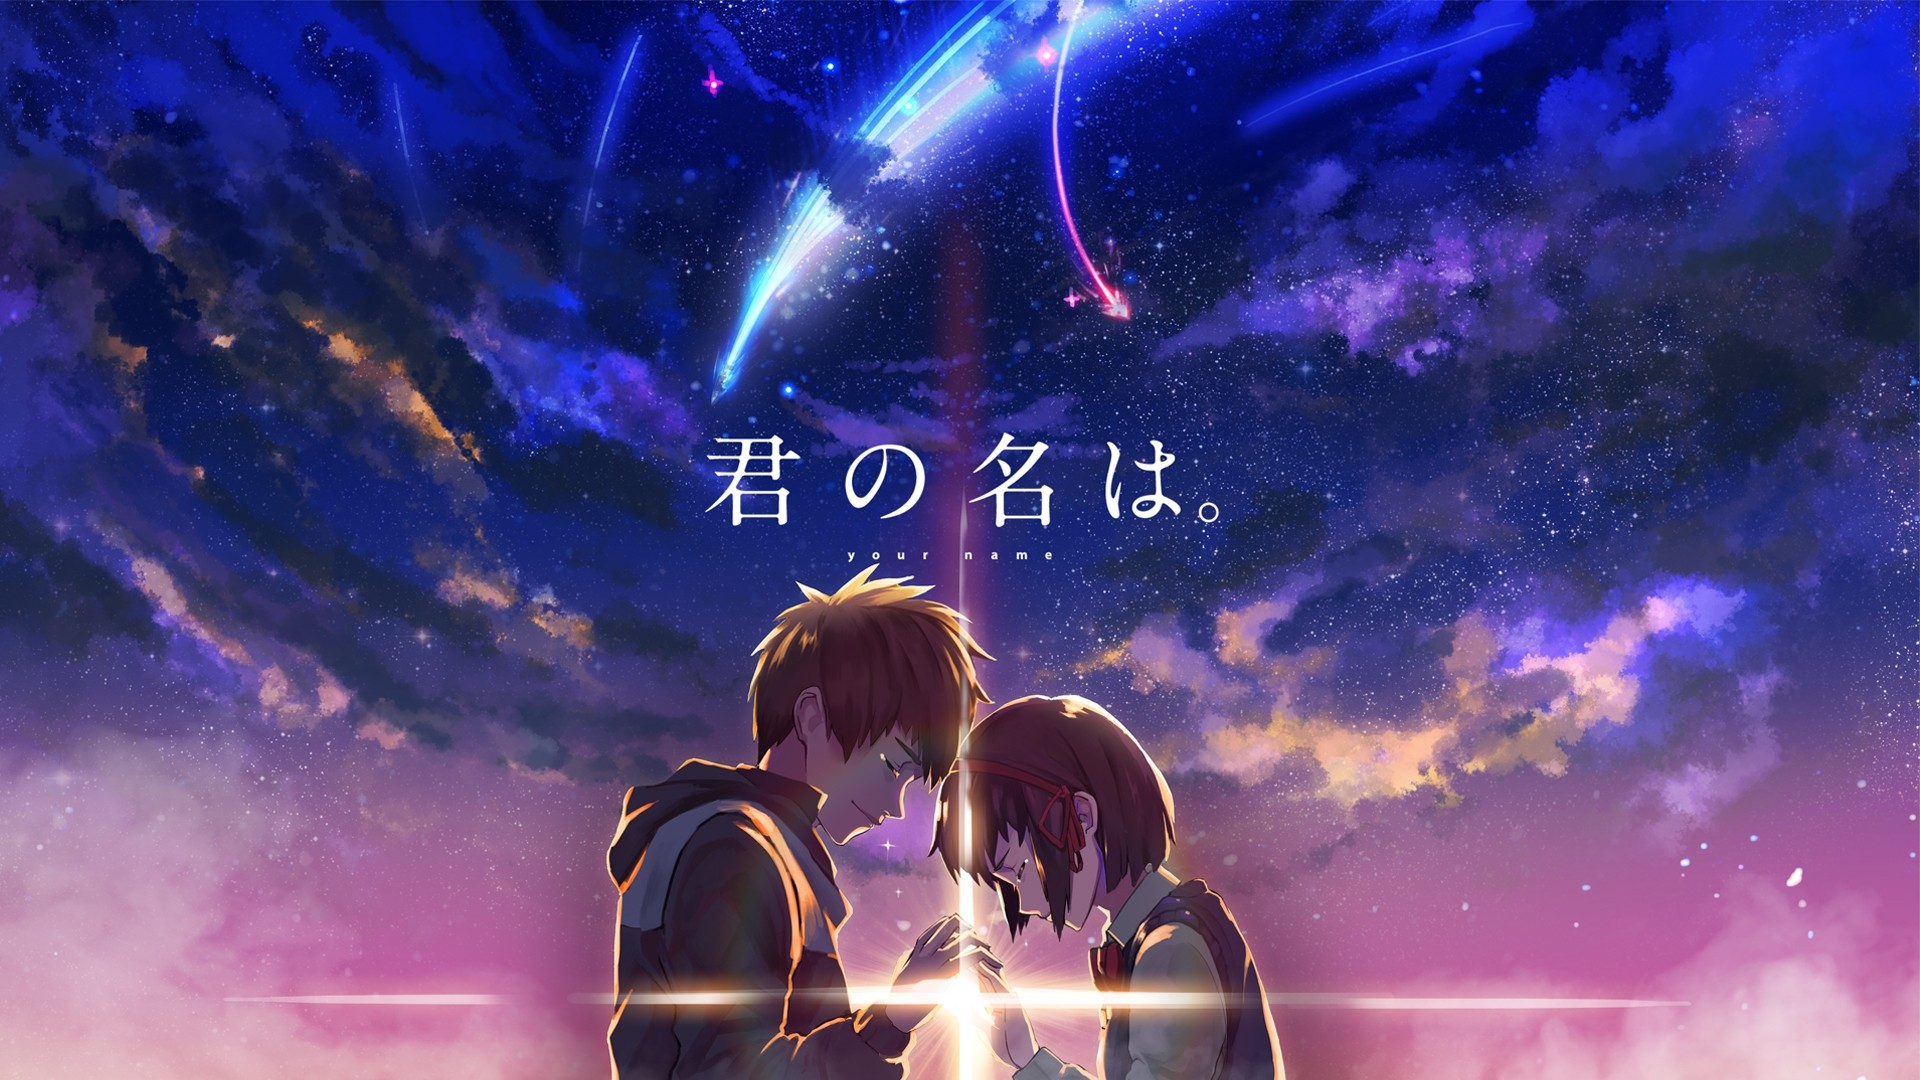 Your Name hd wallpaper download